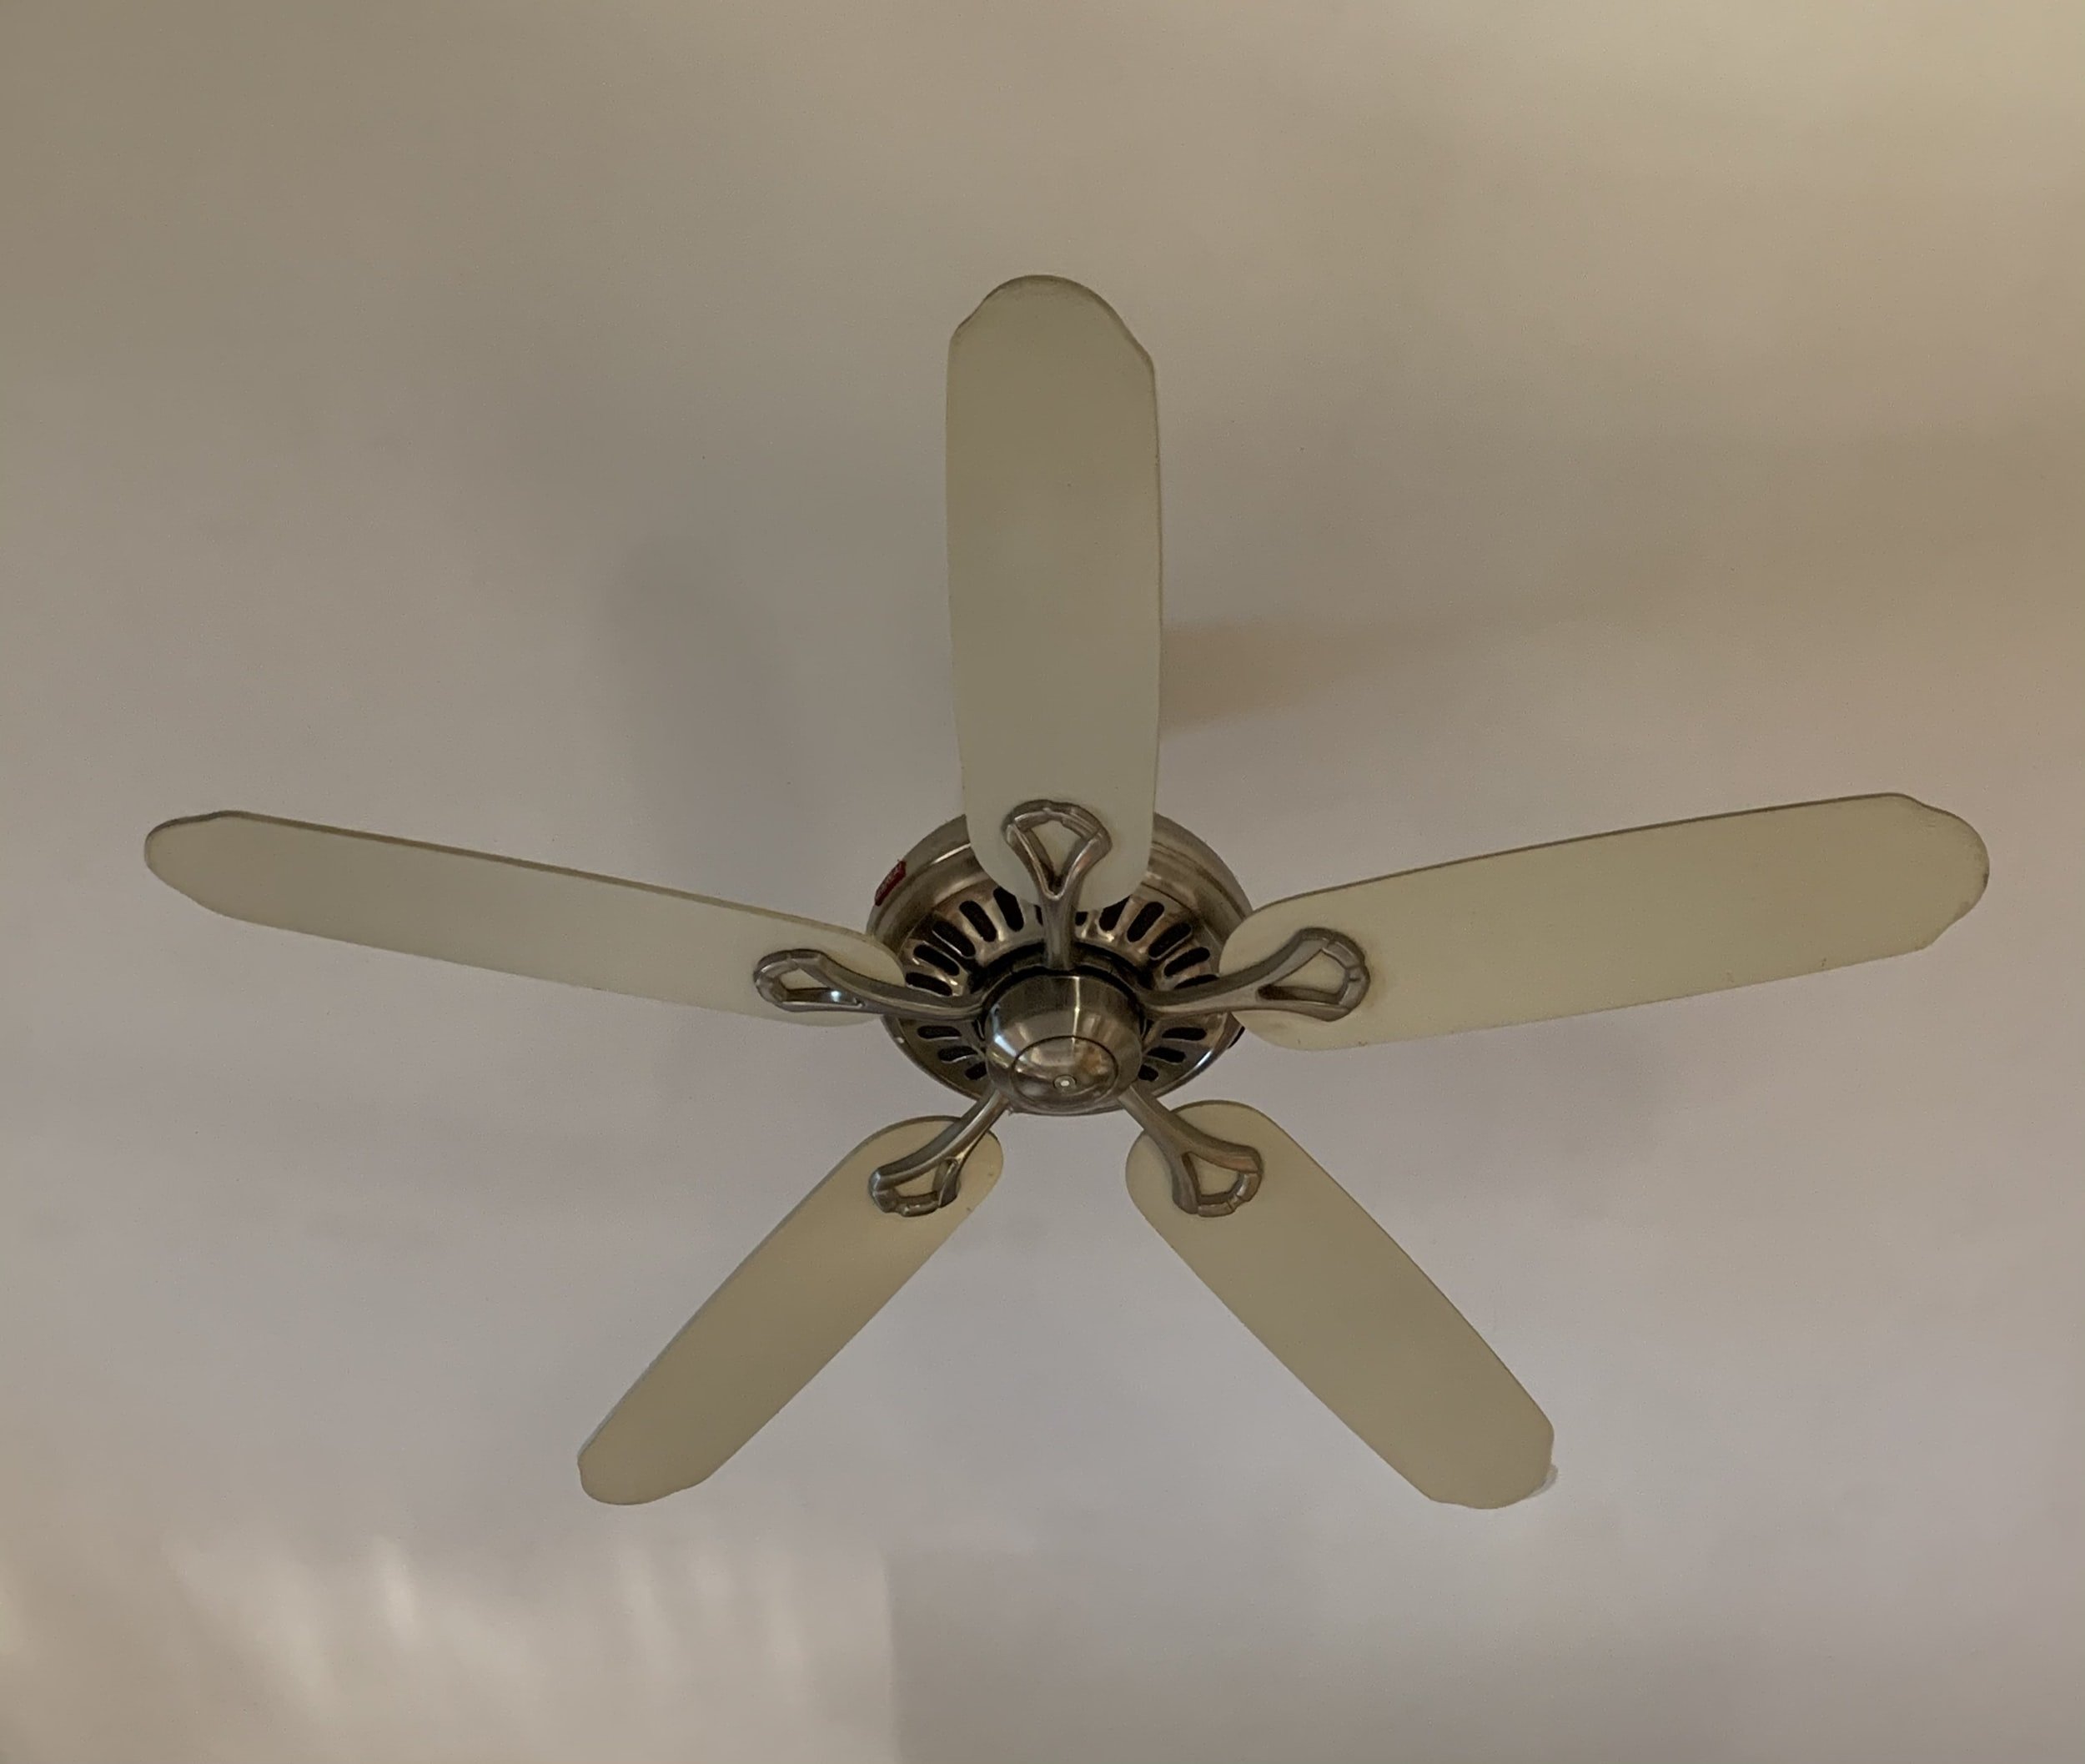 save-money-hvac-Minneapolis-air-conditioning-cooling-tips